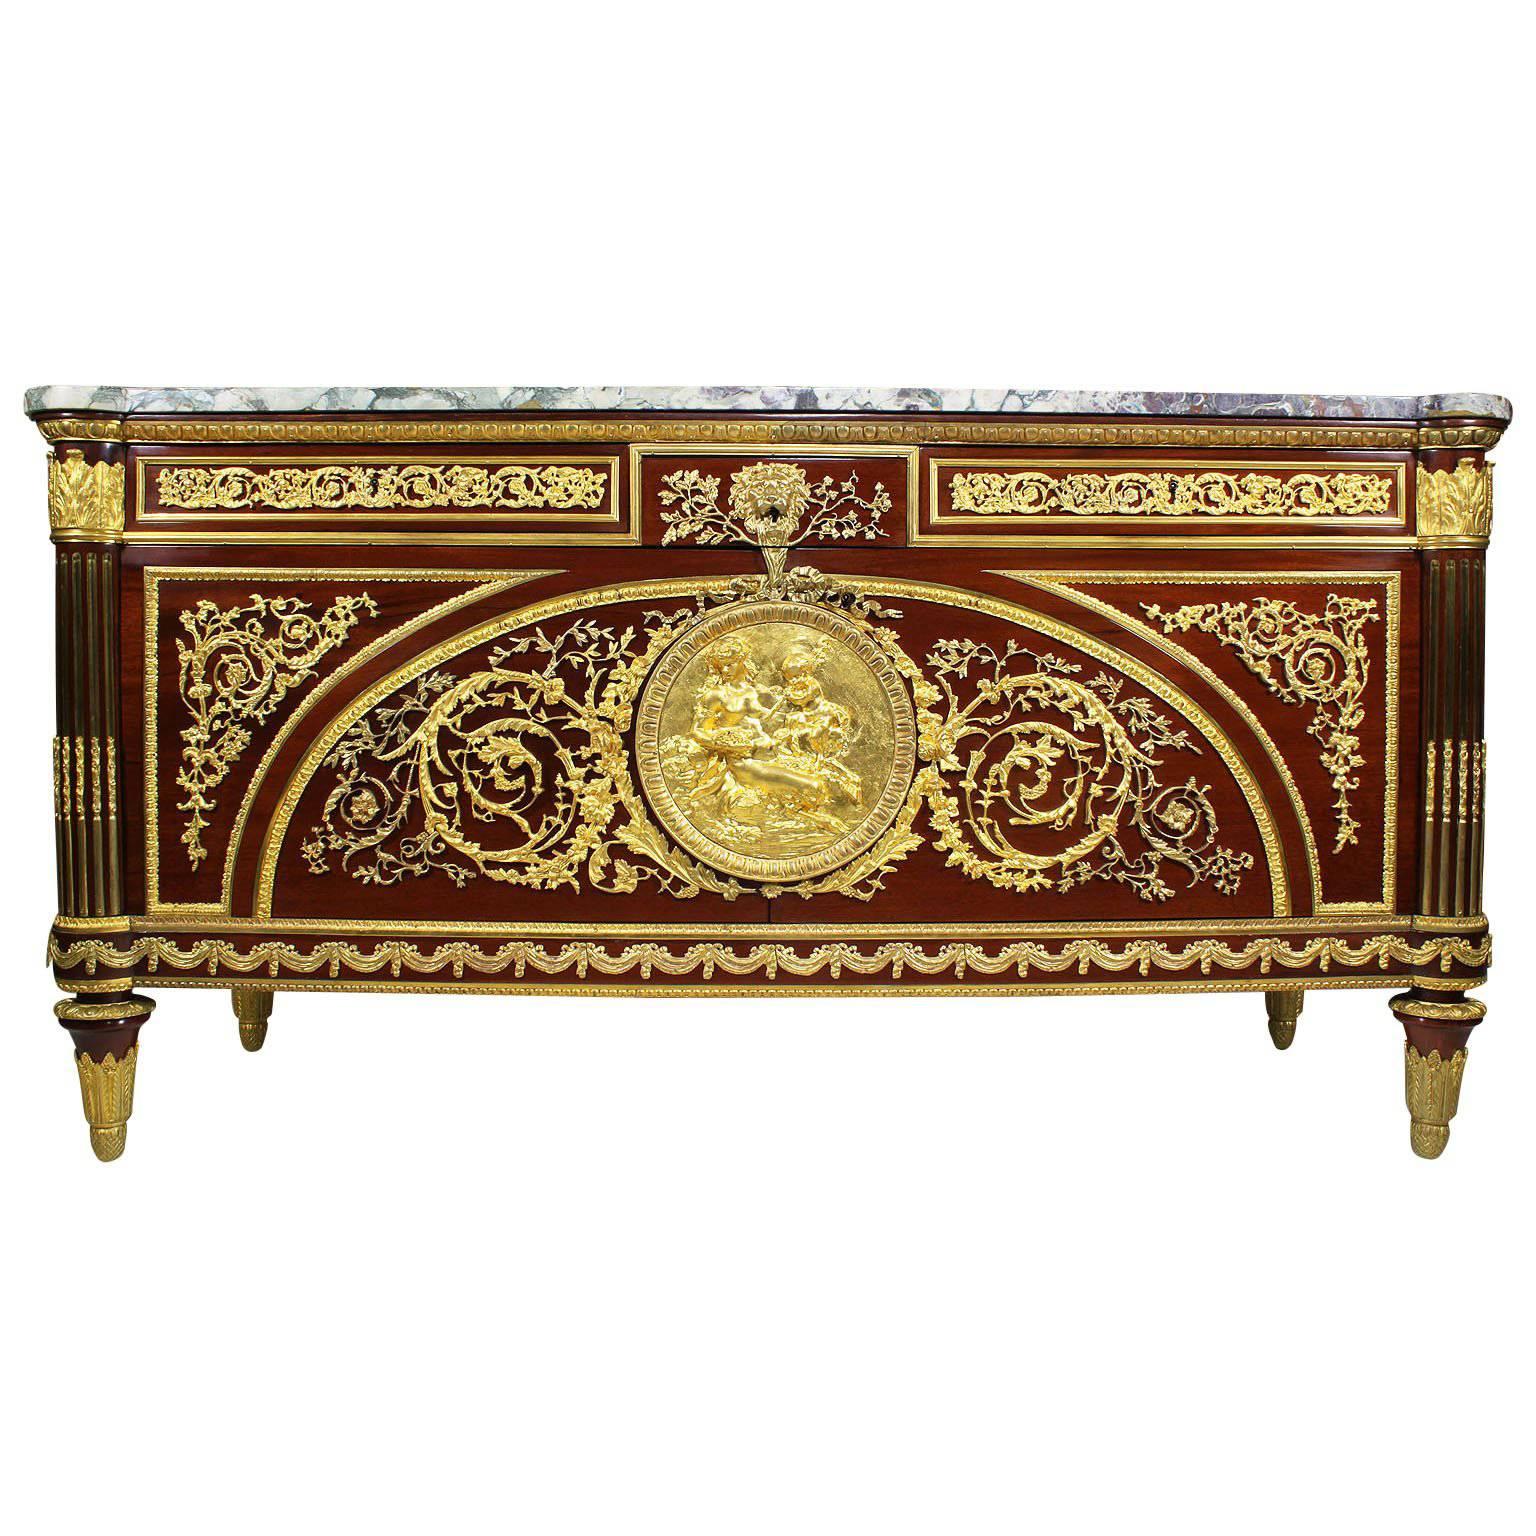 French 19th-20th Century Louis XVI Style Mahogany Ormolu-Mounted Commode